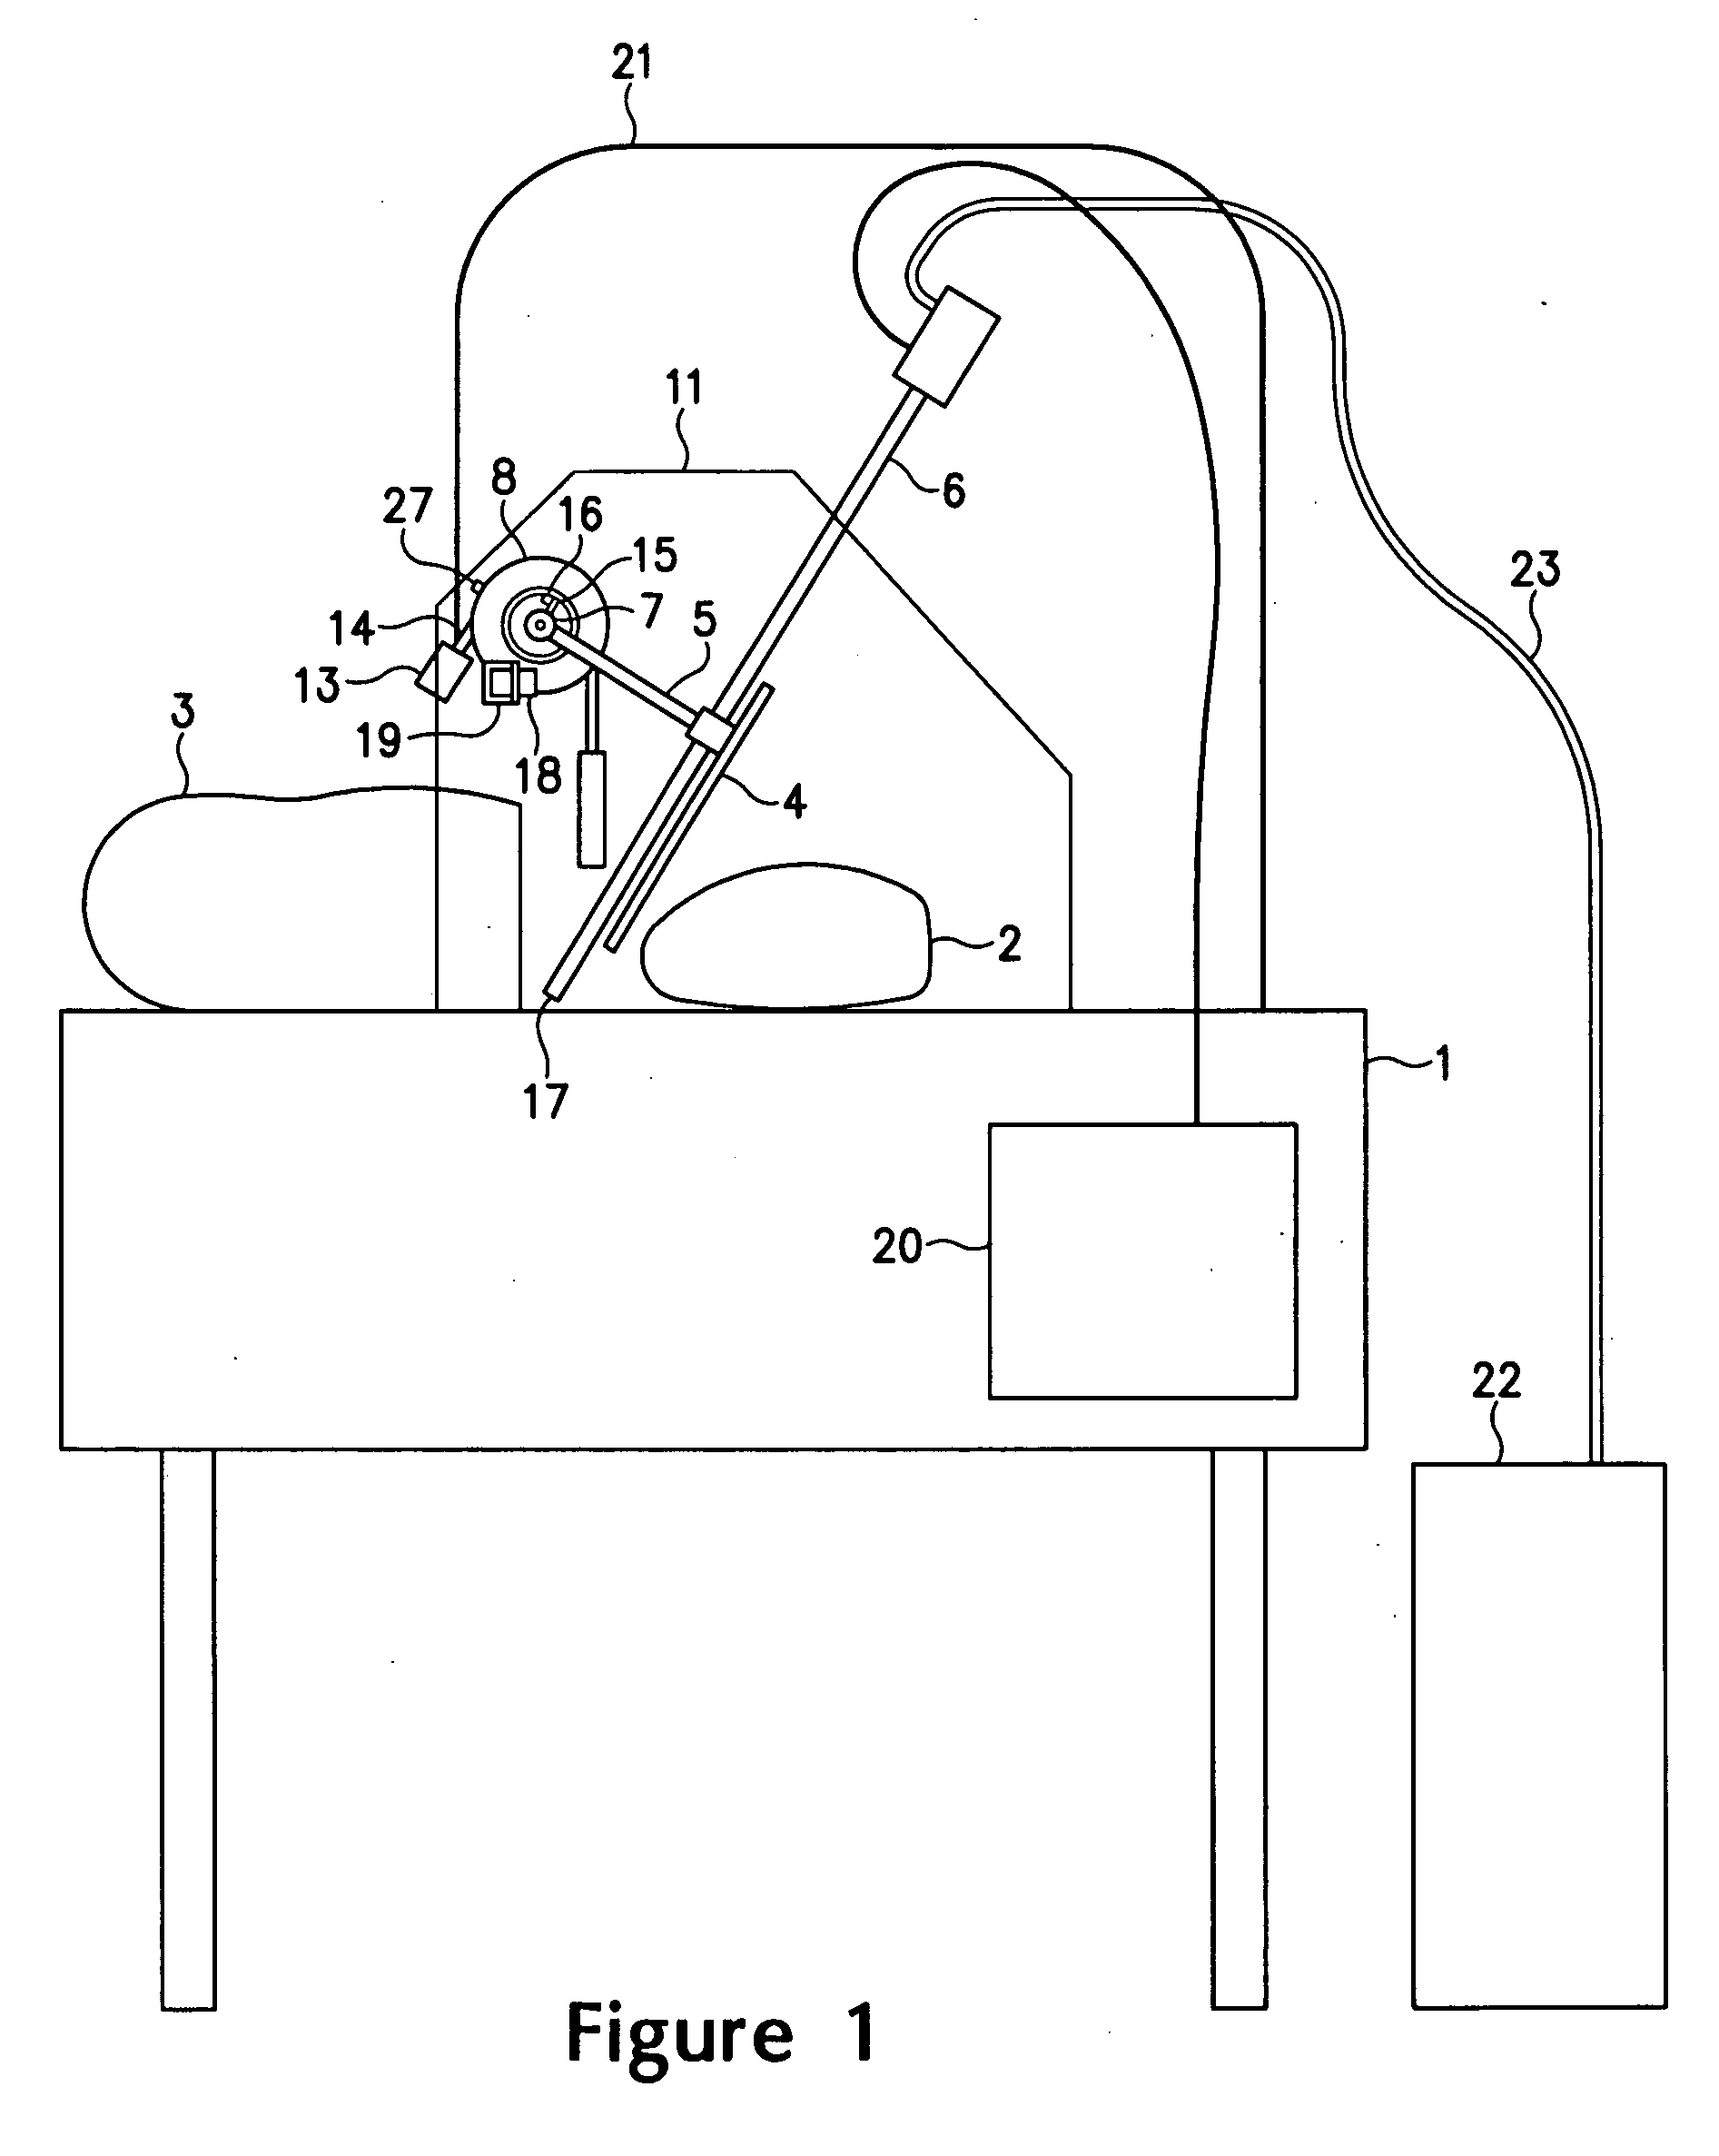 Method and apparatus for treatment of food products